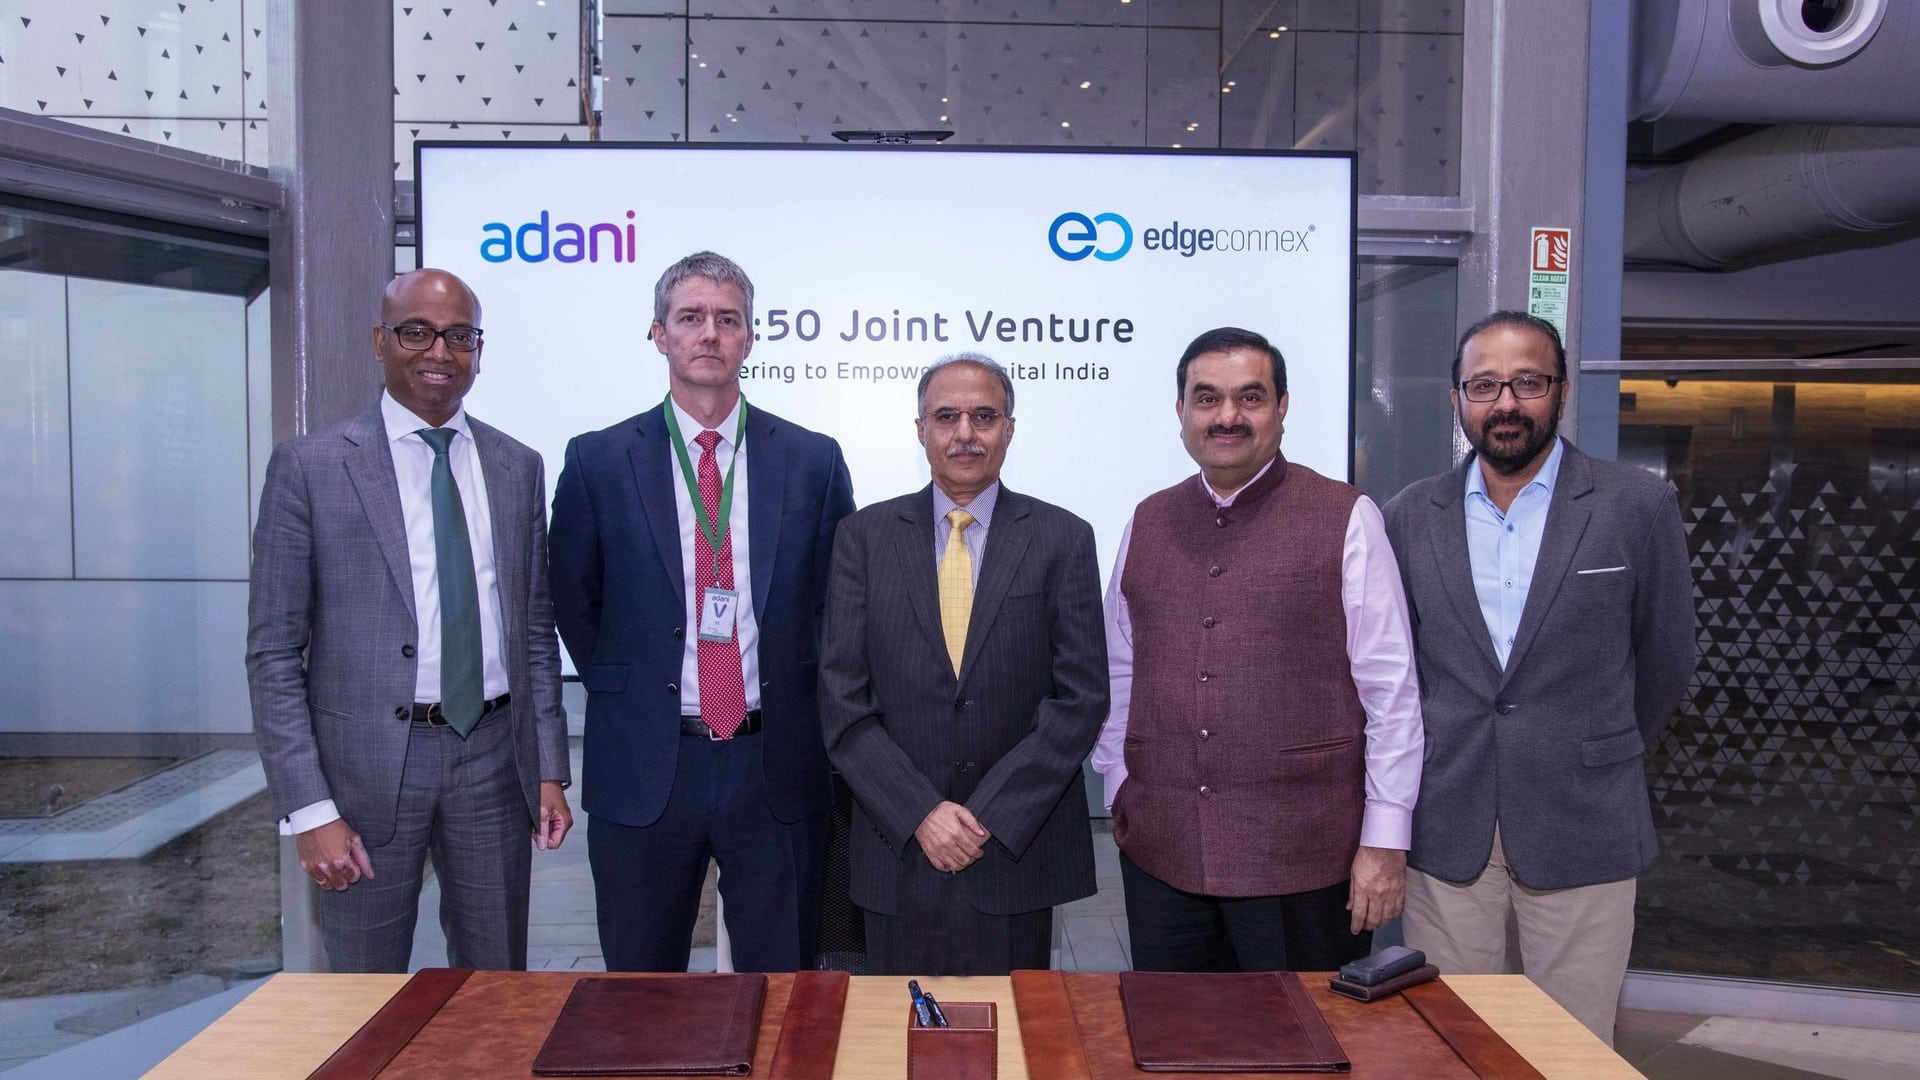 AdaniConneX secures USD 213 million financing facility for data centres